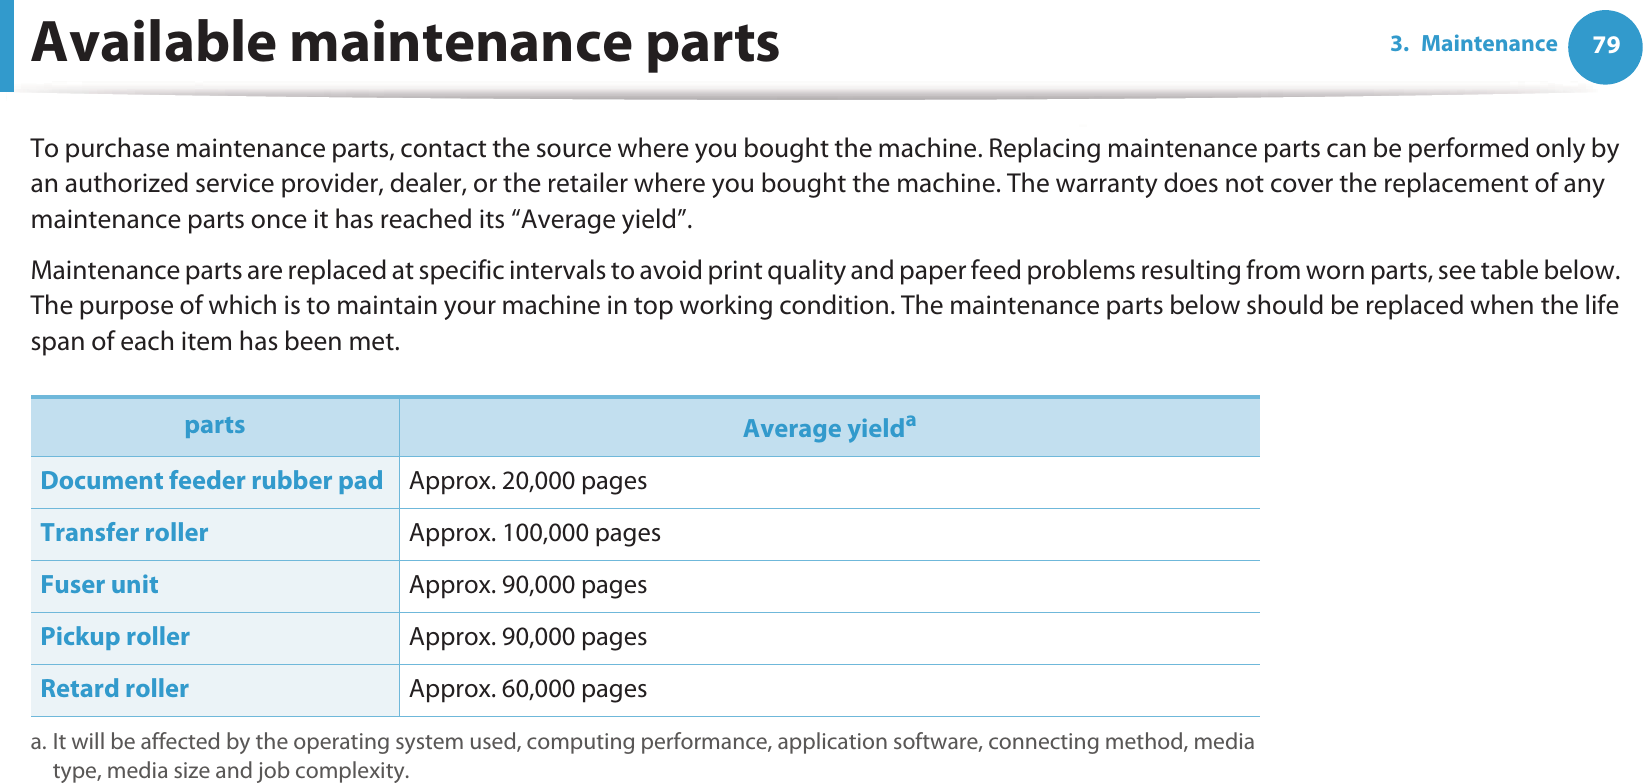 793. MaintenanceAvailable maintenance partsTo purchase maintenance parts, contact the source where you bought the machine. Replacing maintenance parts can be performed only by an authorized service provider, dealer, or the retailer where you bought the machine. The warranty does not cover the replacement of any maintenance parts once it has reached its “Average yield”.Maintenance parts are replaced at specific intervals to avoid print quality and paper feed problems resulting from worn parts, see table below. The purpose of which is to maintain your machine in top working condition. The maintenance parts below should be replaced when the life span of each item has been met.parts Average yieldaa. It will be affected by the operating system used, computing performance, application software, connecting method, media type, media size and job complexity.Document feeder rubber pad Approx. 20,000 pagesTransfer roller Approx. 100,000 pages Fuser unit Approx. 90,000 pagesPickup roller Approx. 90,000 pagesRetard roller Approx. 60,000 pages